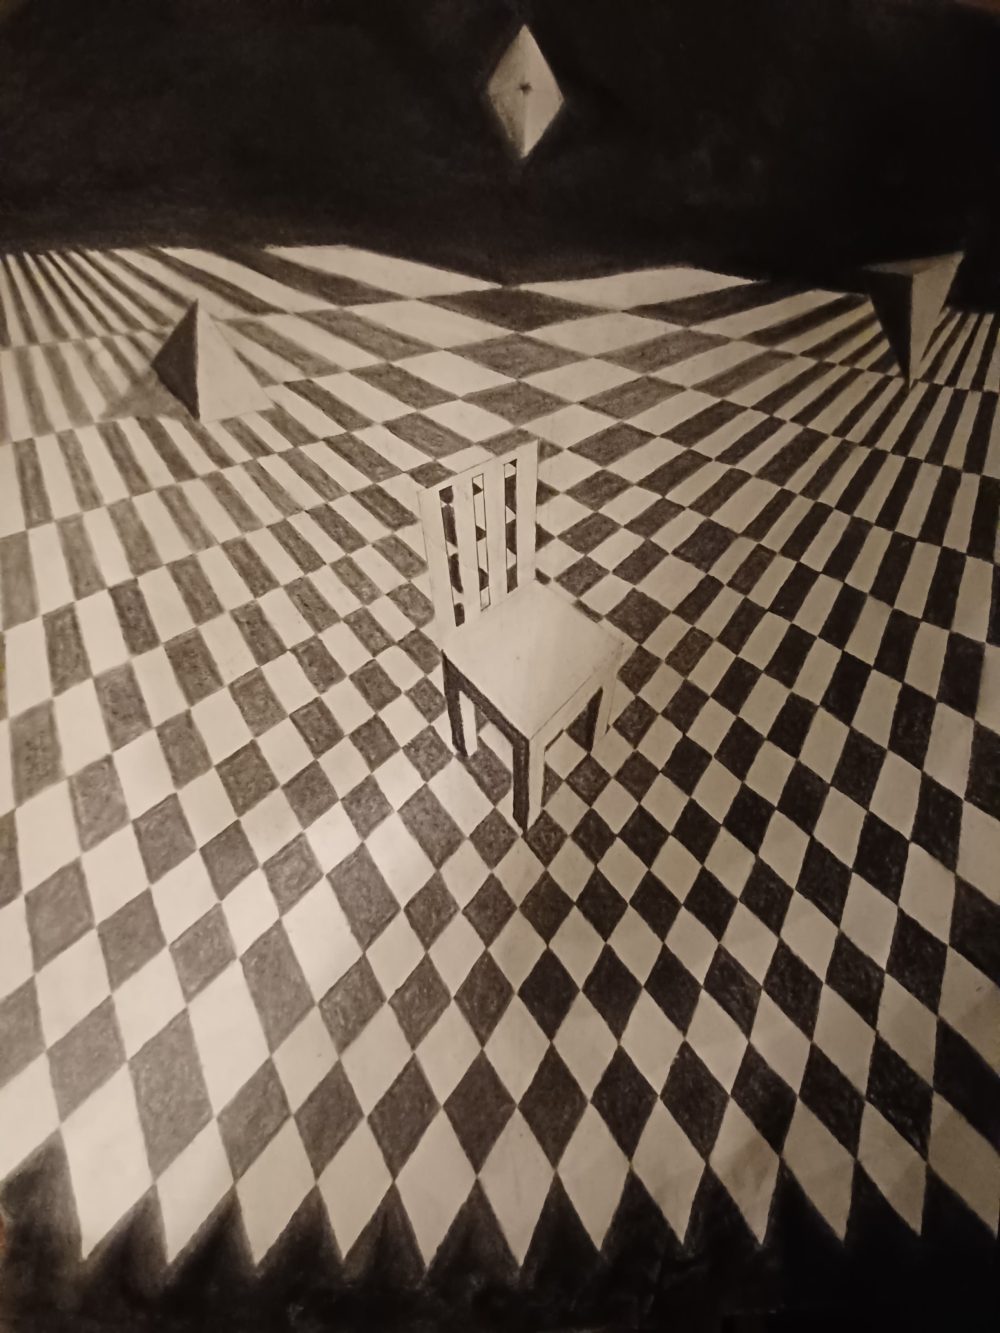 Black and white drawing of a chair in the middle of this squared space, while the geometrical triangles and diamonds flow sacredly around the chair